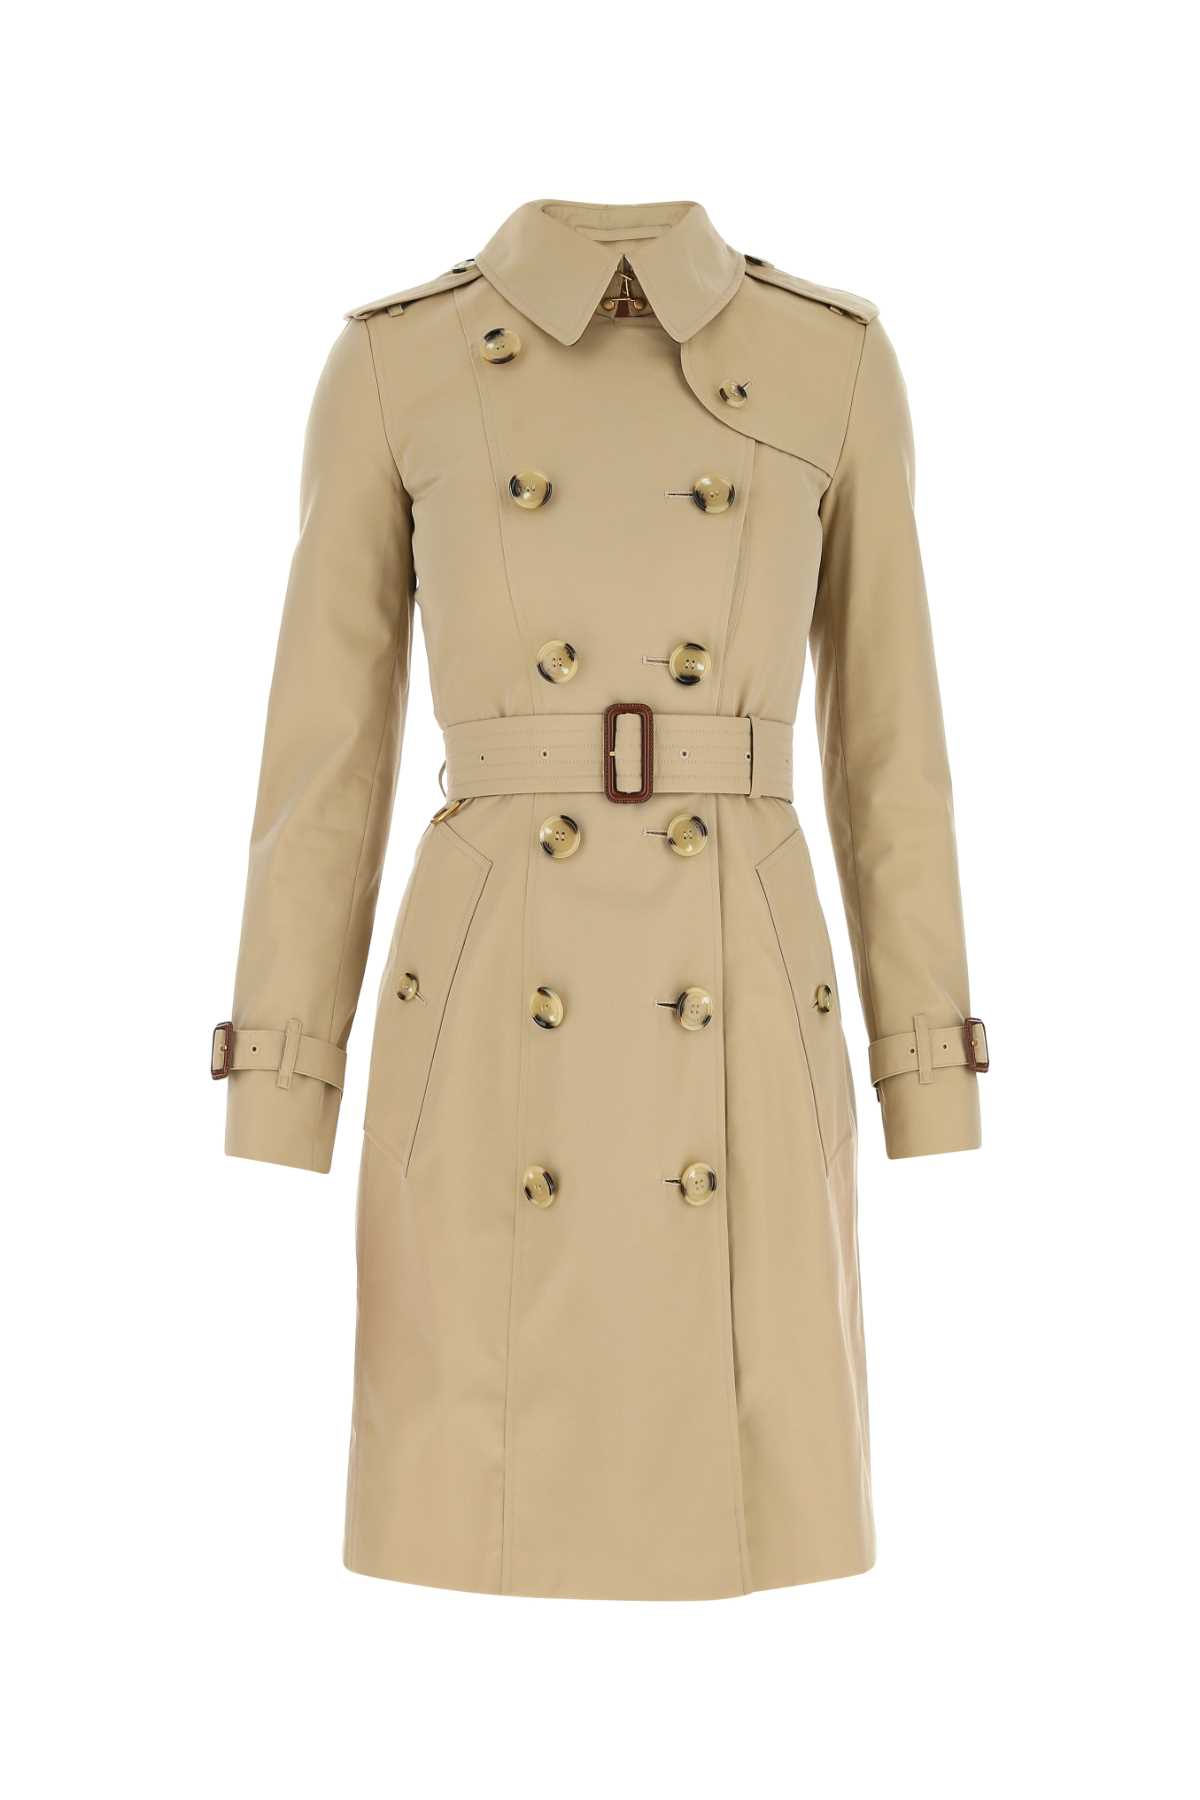 Shop Burberry Cappuccino Cotton Trench Coat In A1366